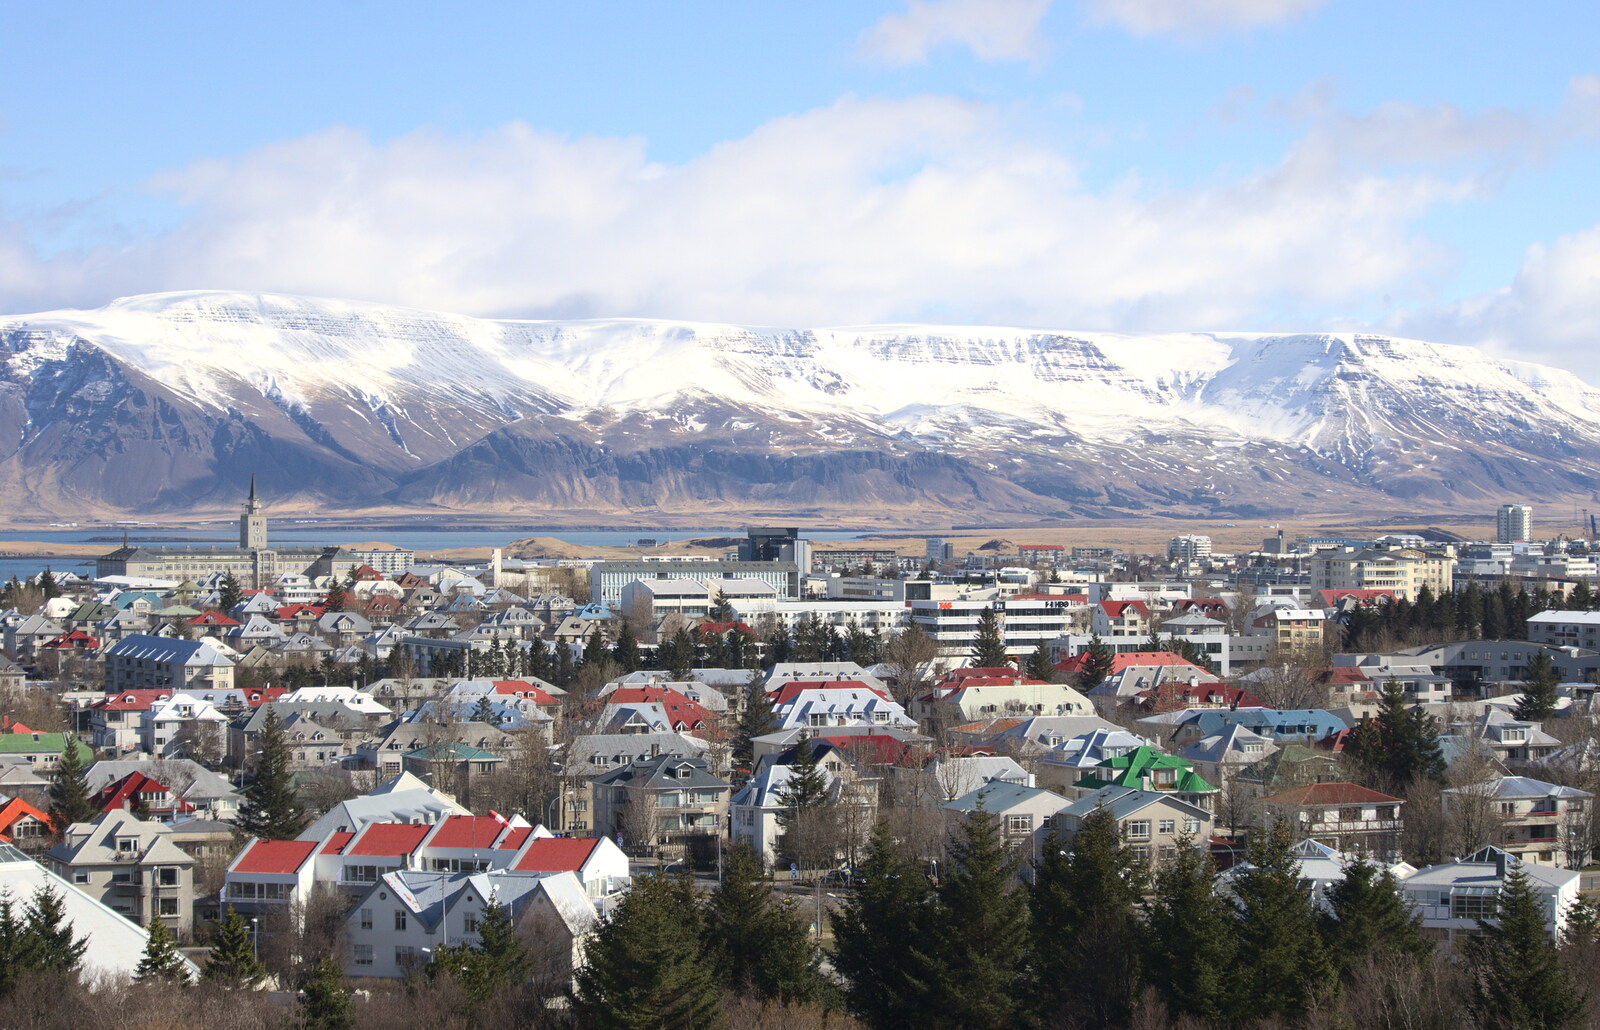 A nice view to the mountains from Stríðsminjar War Relics, Perlan and Street Art, Reykjavik, Iceland - 23rd April 2017